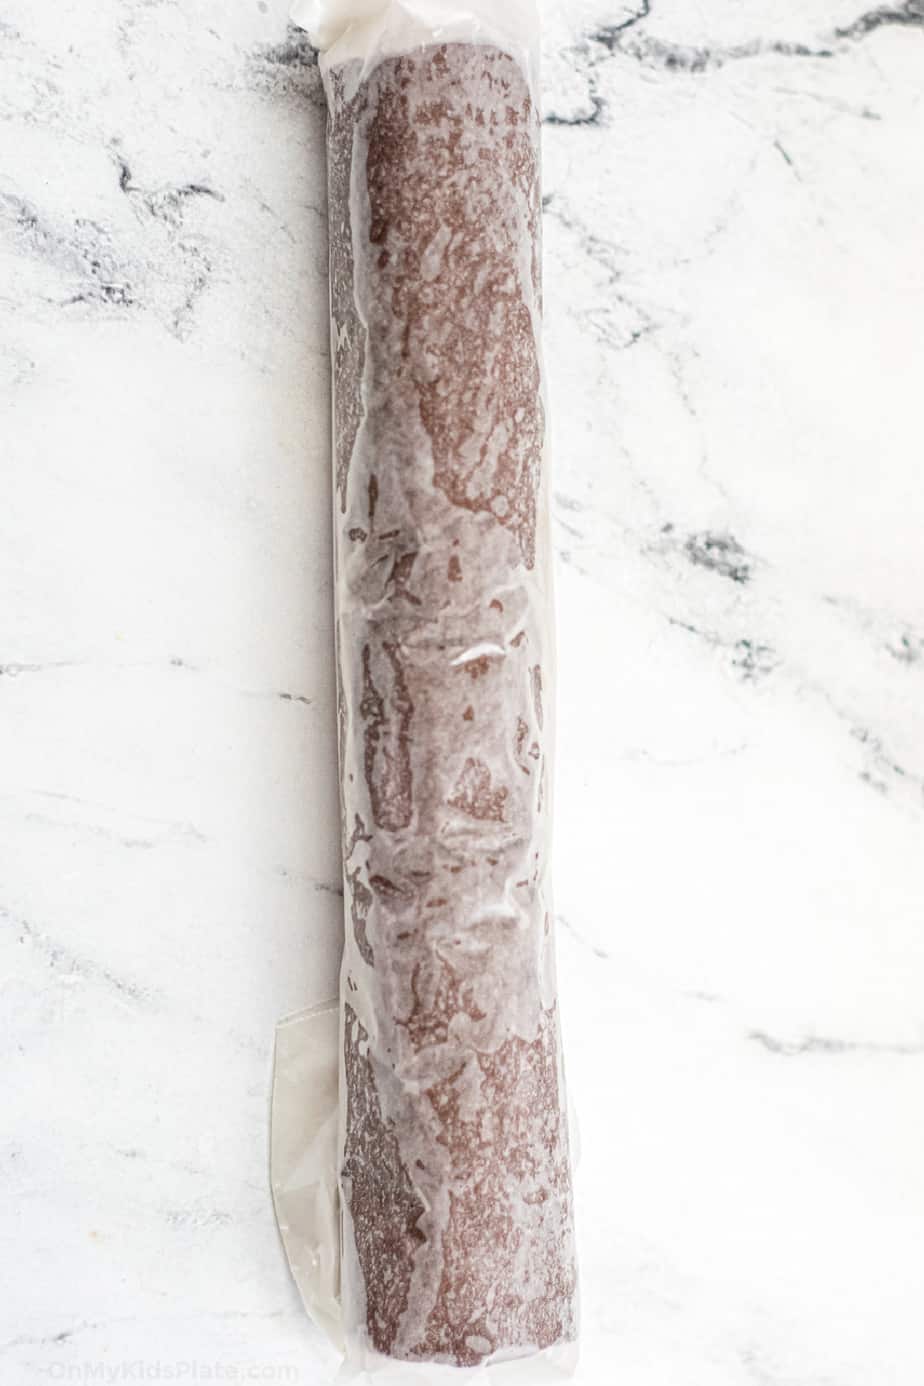 Chocolate cookie dough rolled into a long log and wrapped in parchment paper.